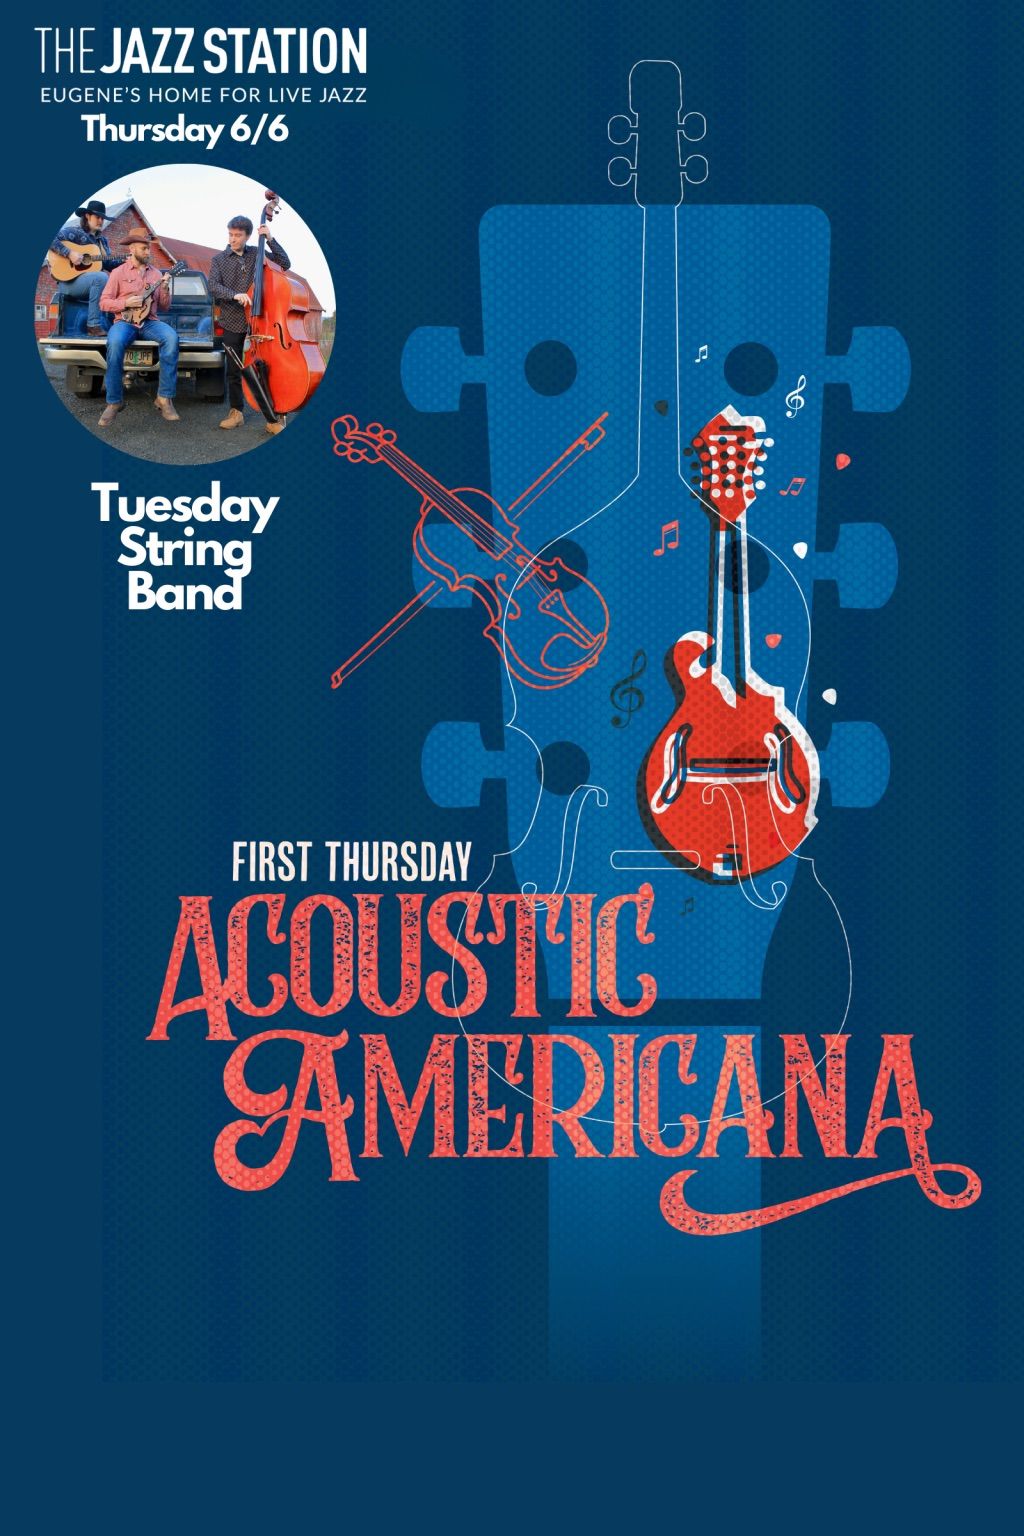 Tuesday String Band | First Thursday Acoustic Americana